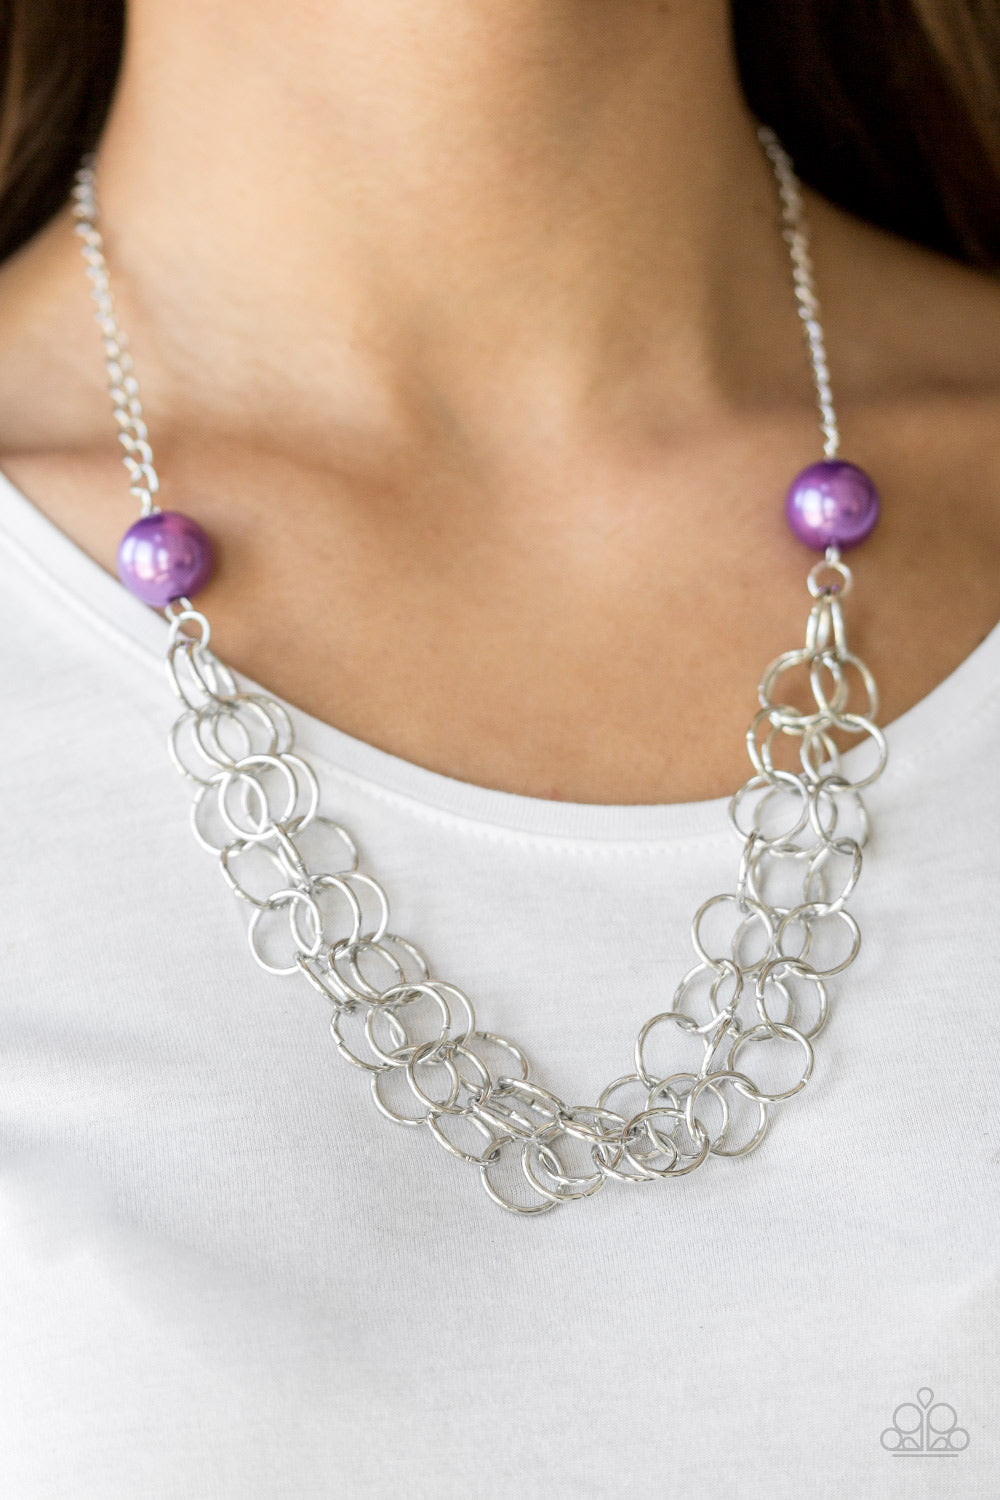 Daring Diva Purple Necklace - Paparazzi Accessories  Two oversized purple pearls give way to dramatic silver chains, creating bold layers below the collar for a sassy look. Features an adjustable clasp closure.   All Paparazzi Accessories are lead free and nickel free!  Sold as one individual necklace. Includes one pair of matching earrings.